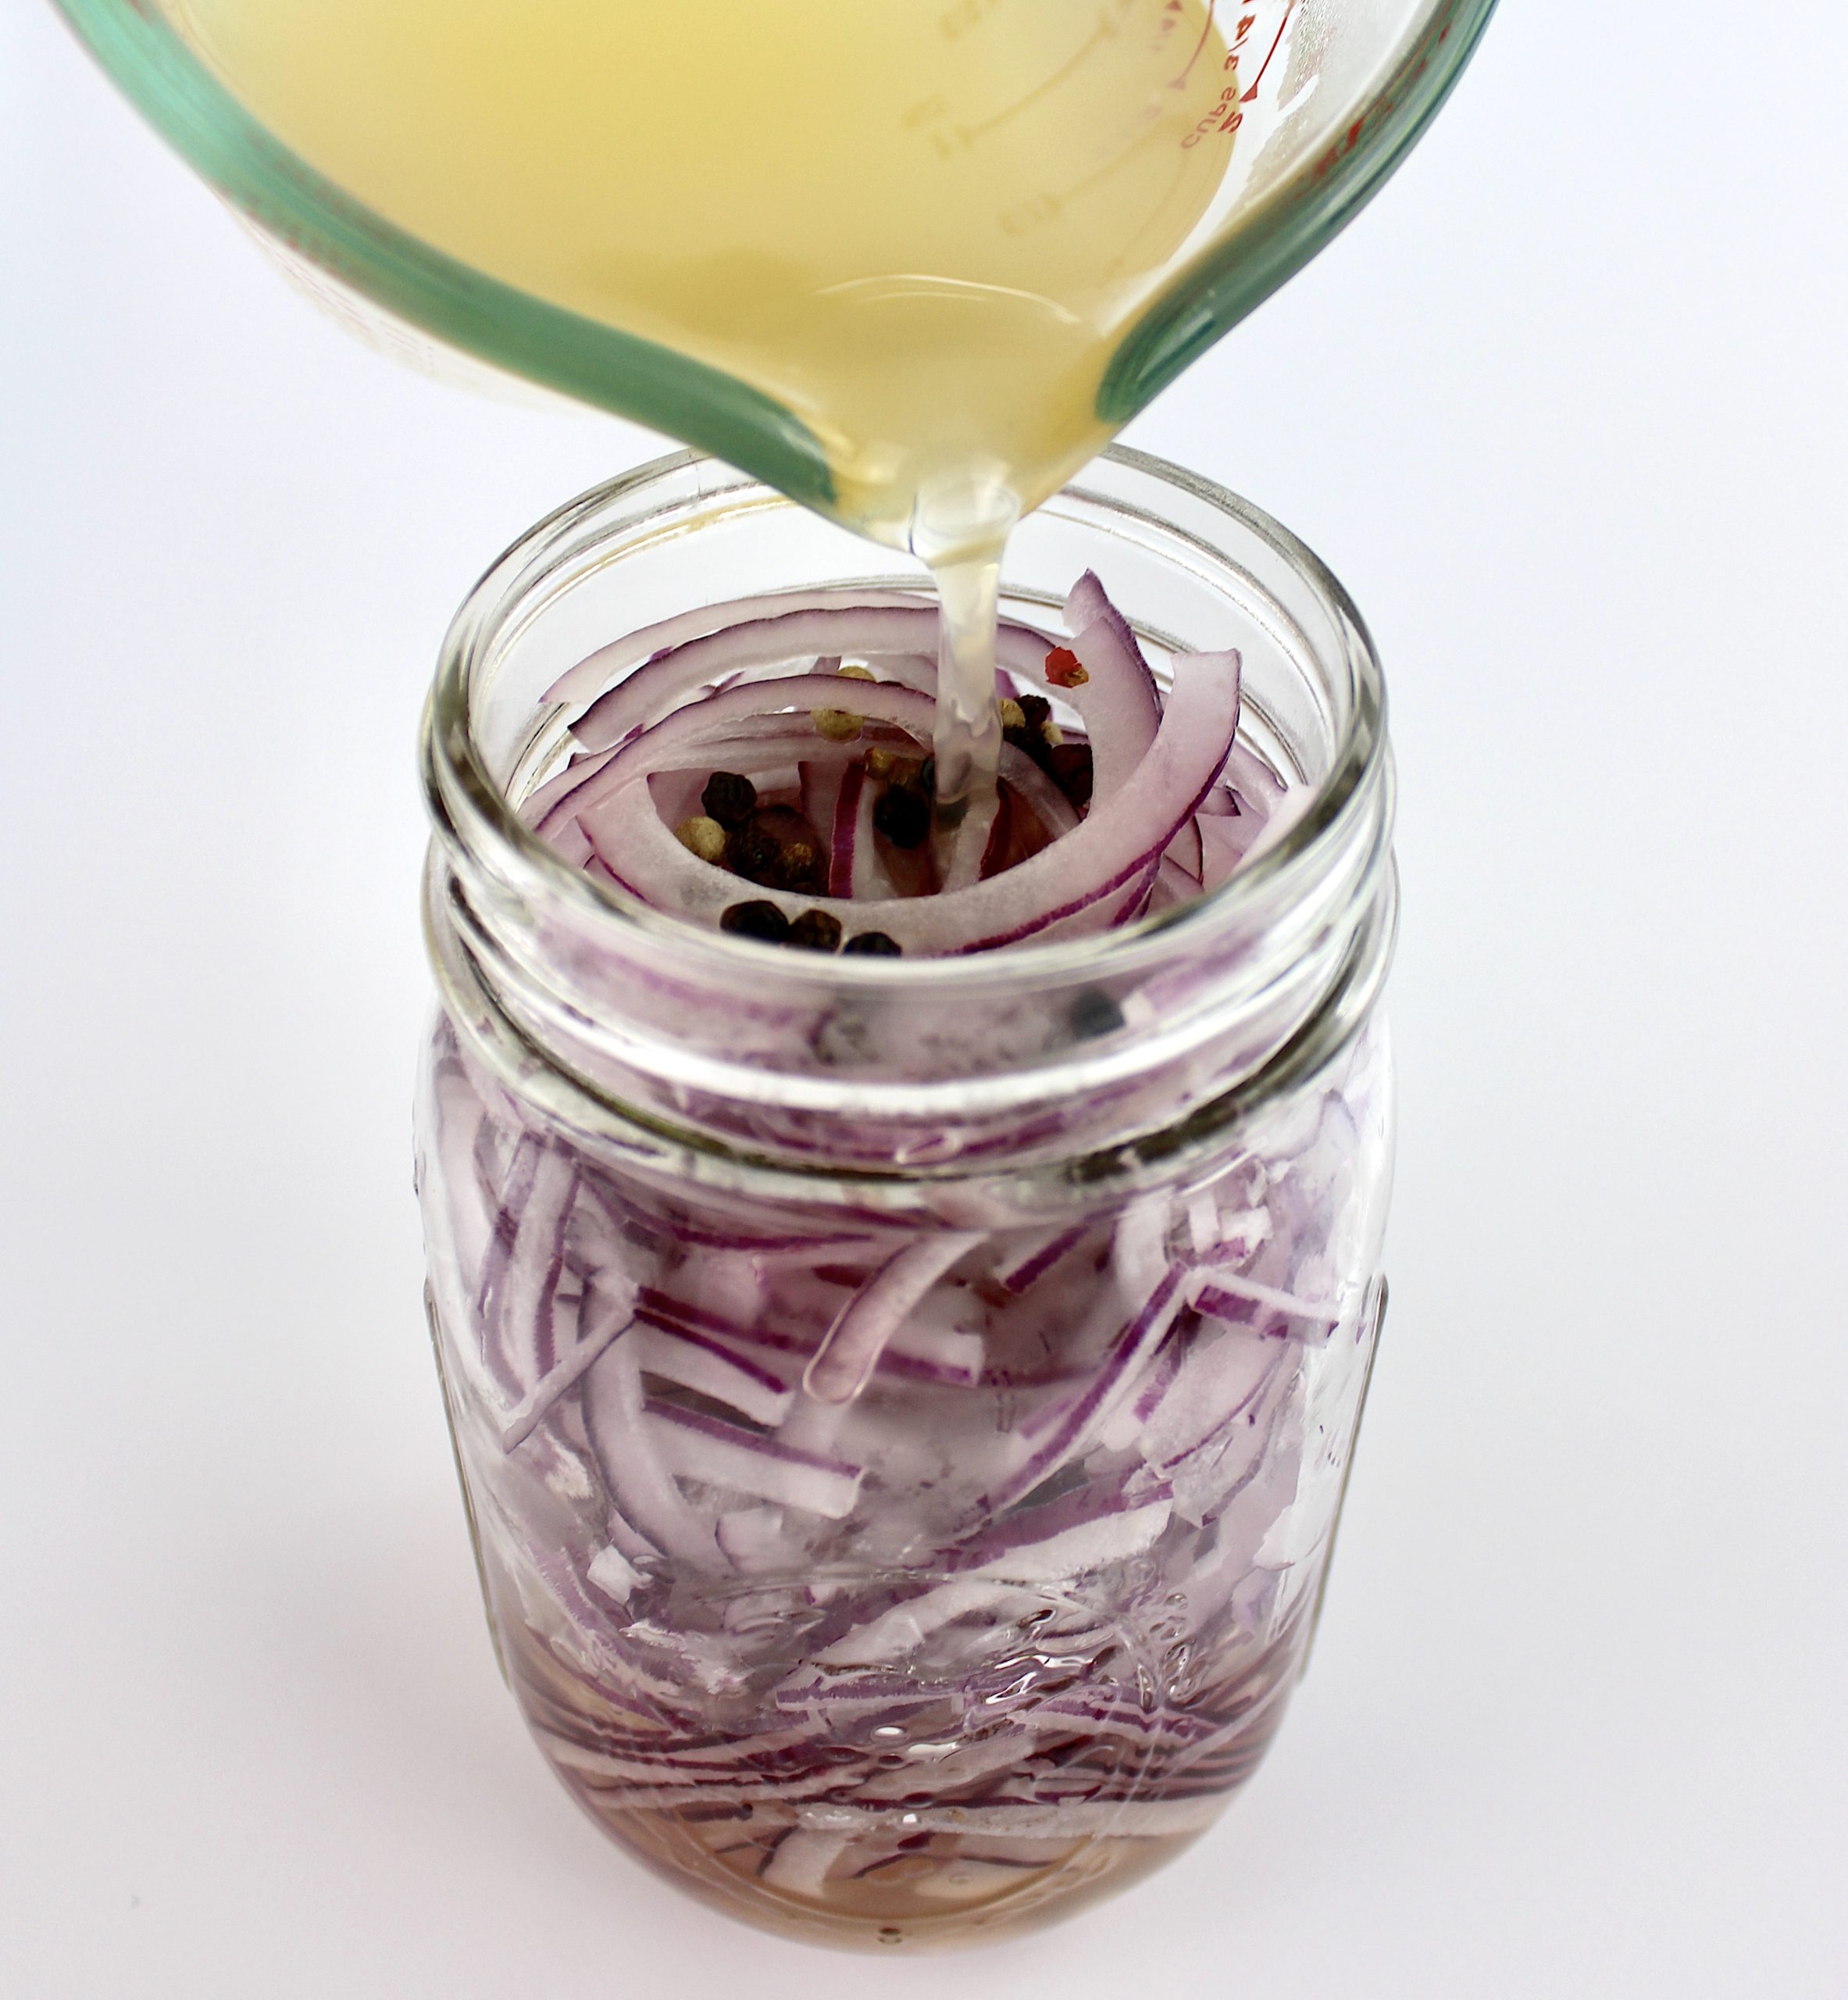 vinegar being poured over sliced onions and peppercorns in open mason jar